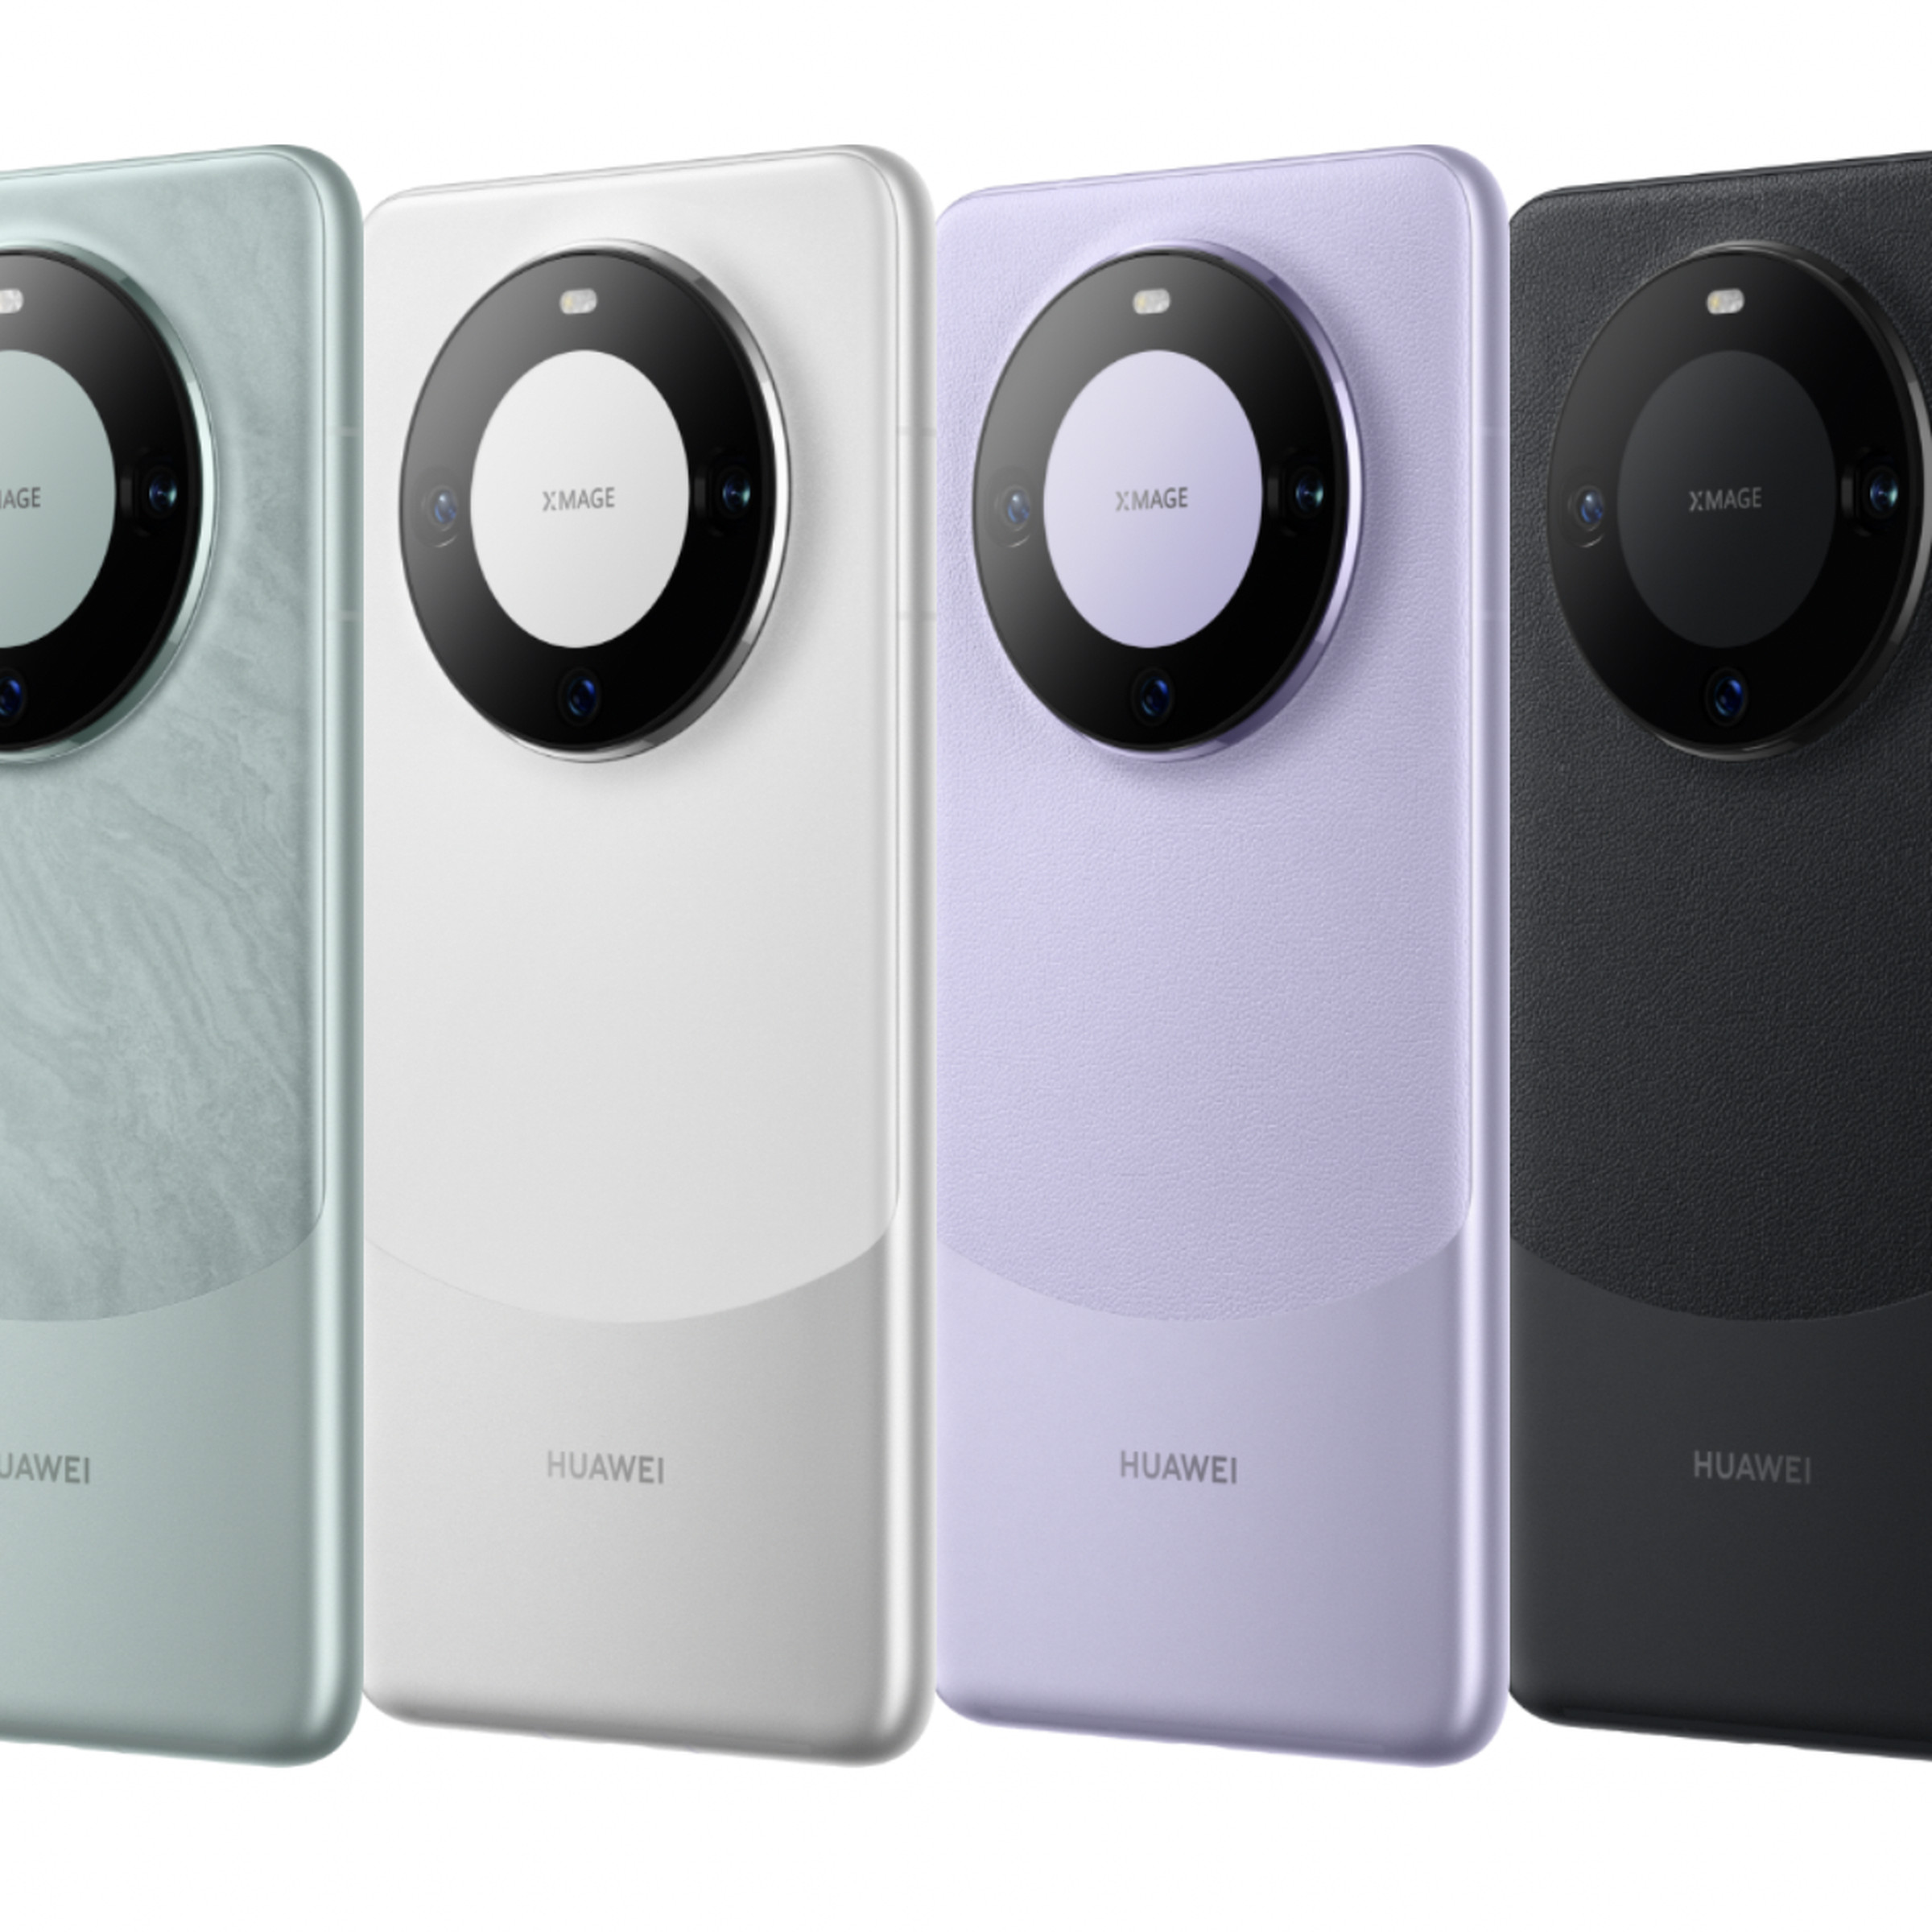 An image showing the Huawei Mate 60 Pro in green, silver, purple, and black